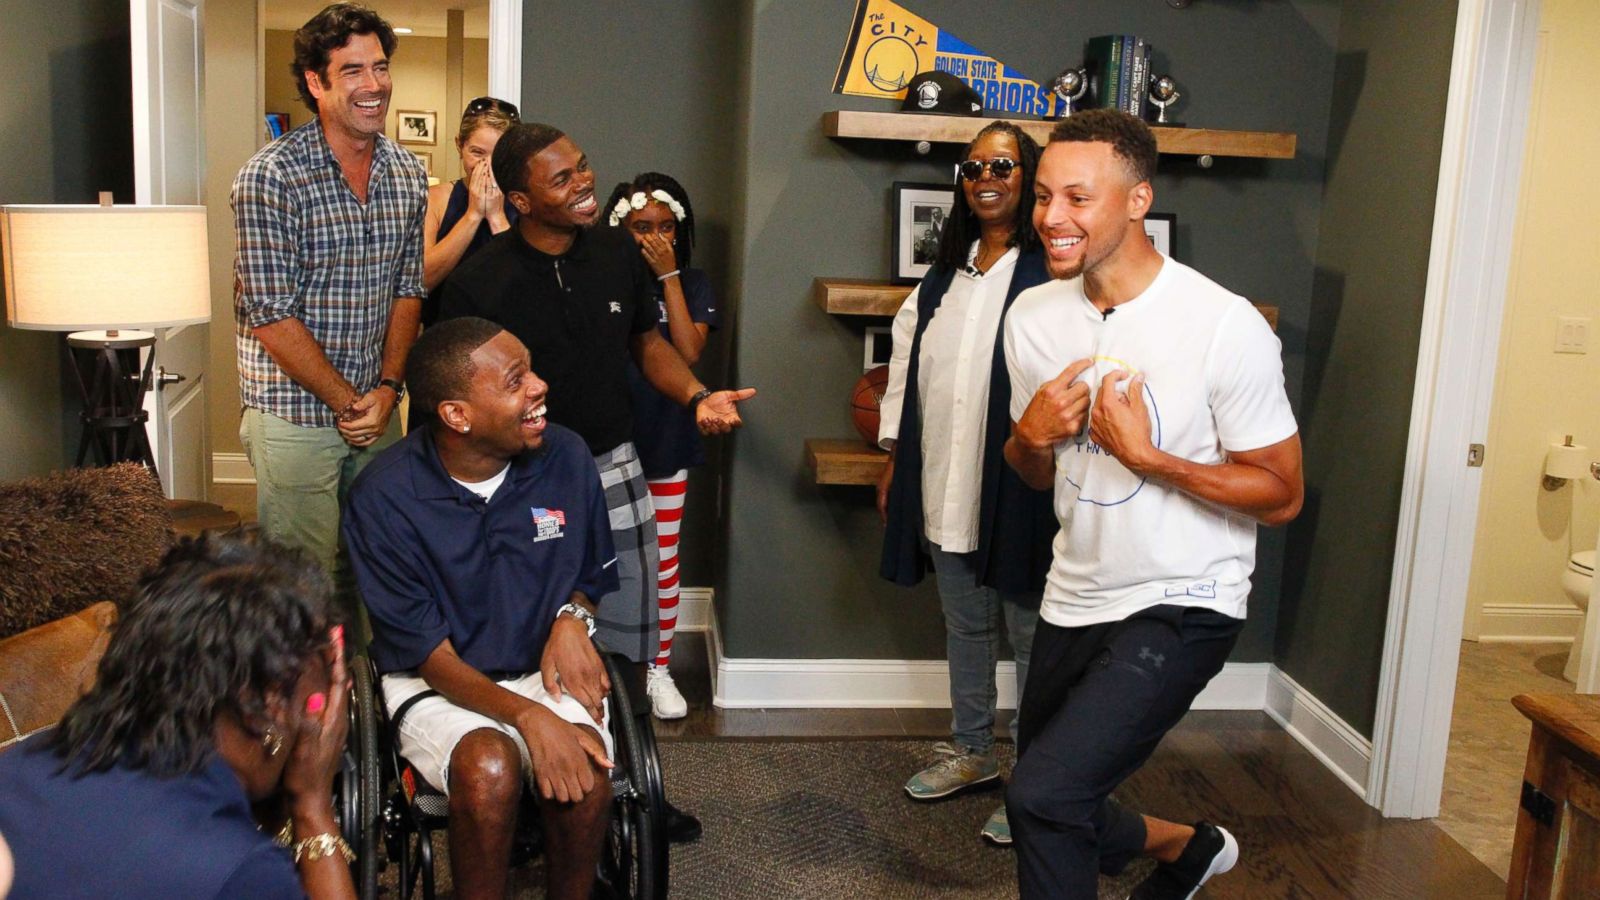 Disabled veteran surprised with new home, visit from Stephen Curry - ABC News